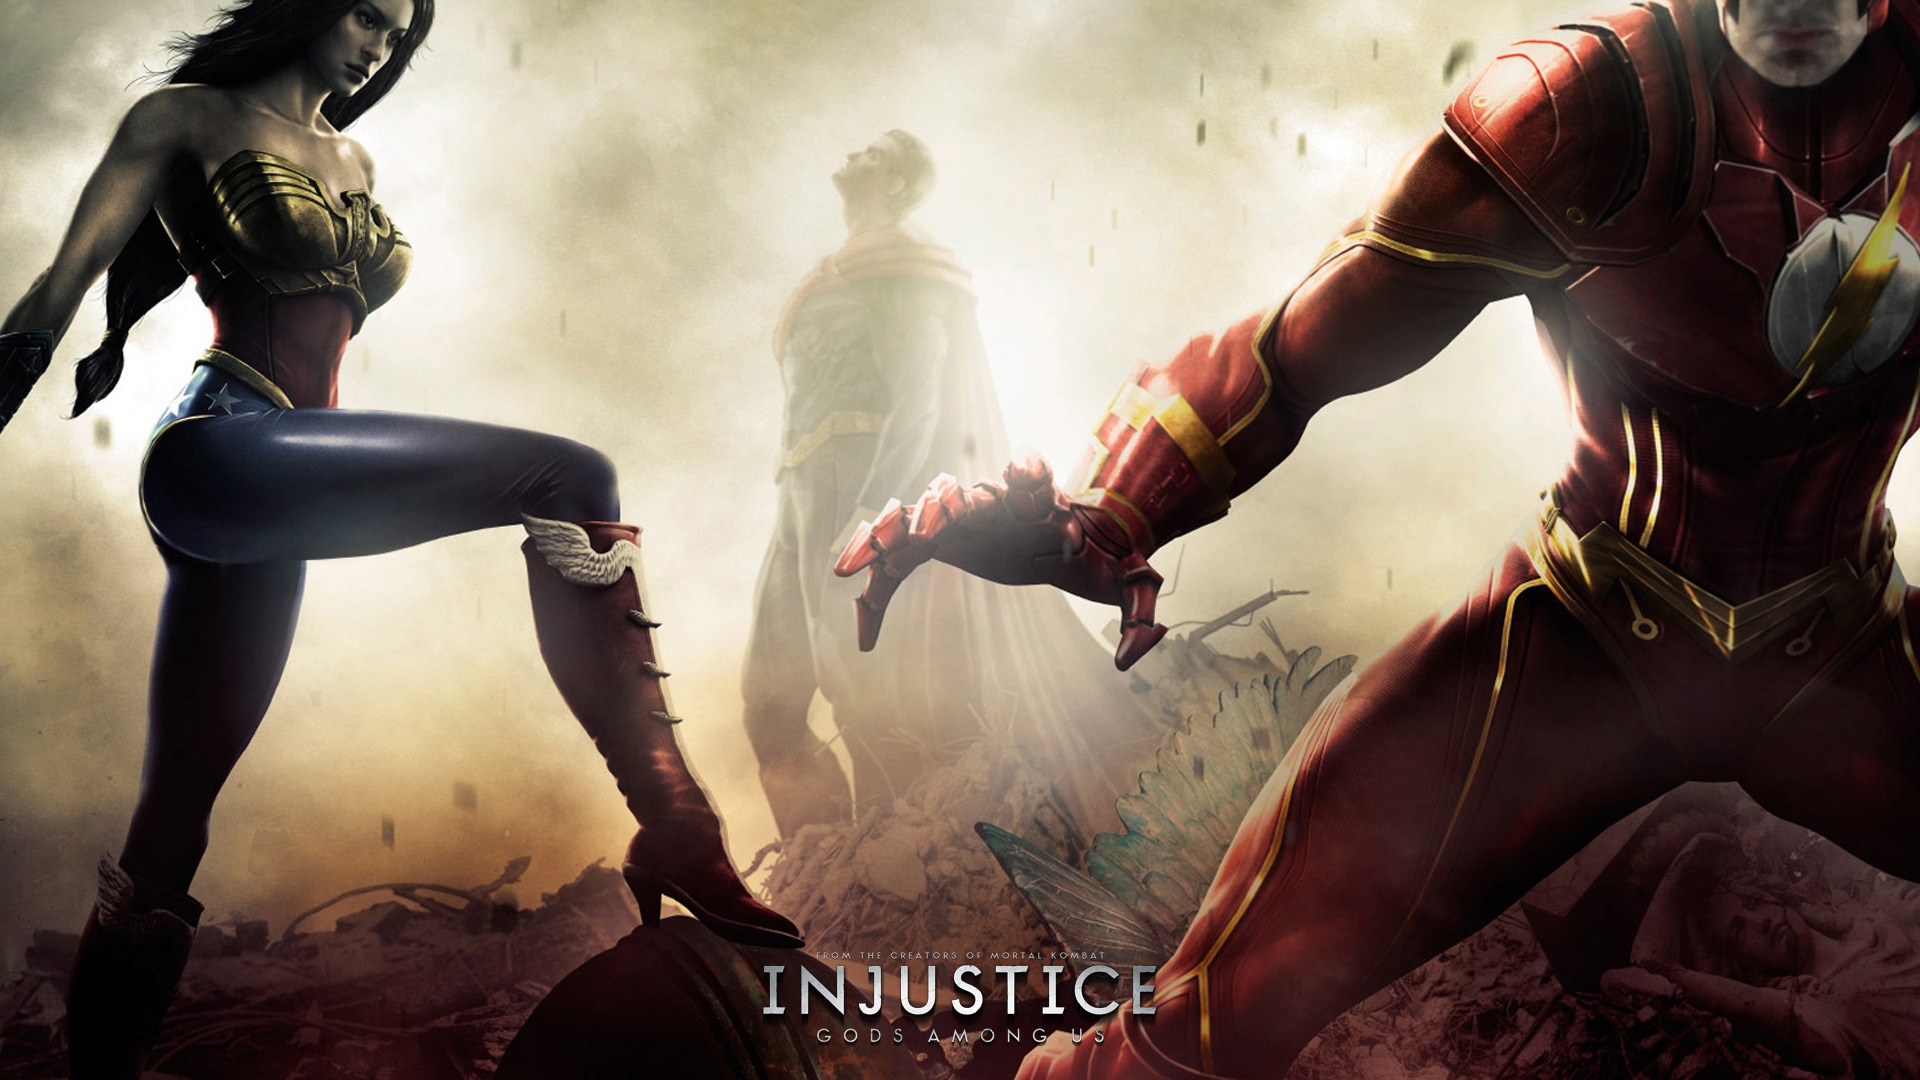 Injustice Gods Among Us Game for 1920 x 1080 HDTV 1080p resolution